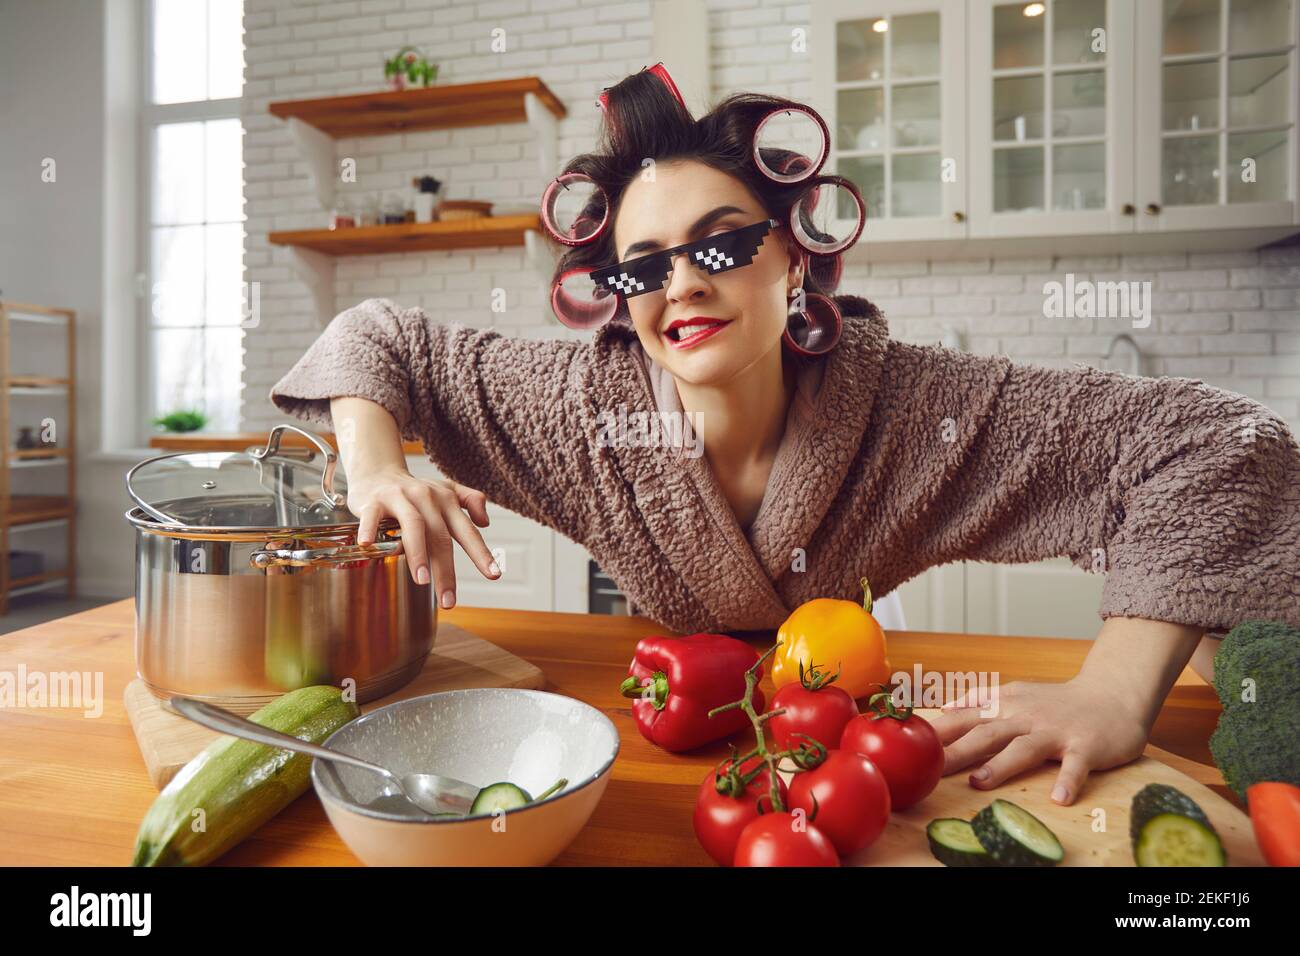 Funny and beautiful crazy woman in hair curlers and bathrobe preparing breakfast in the kitchen. Stock Photo